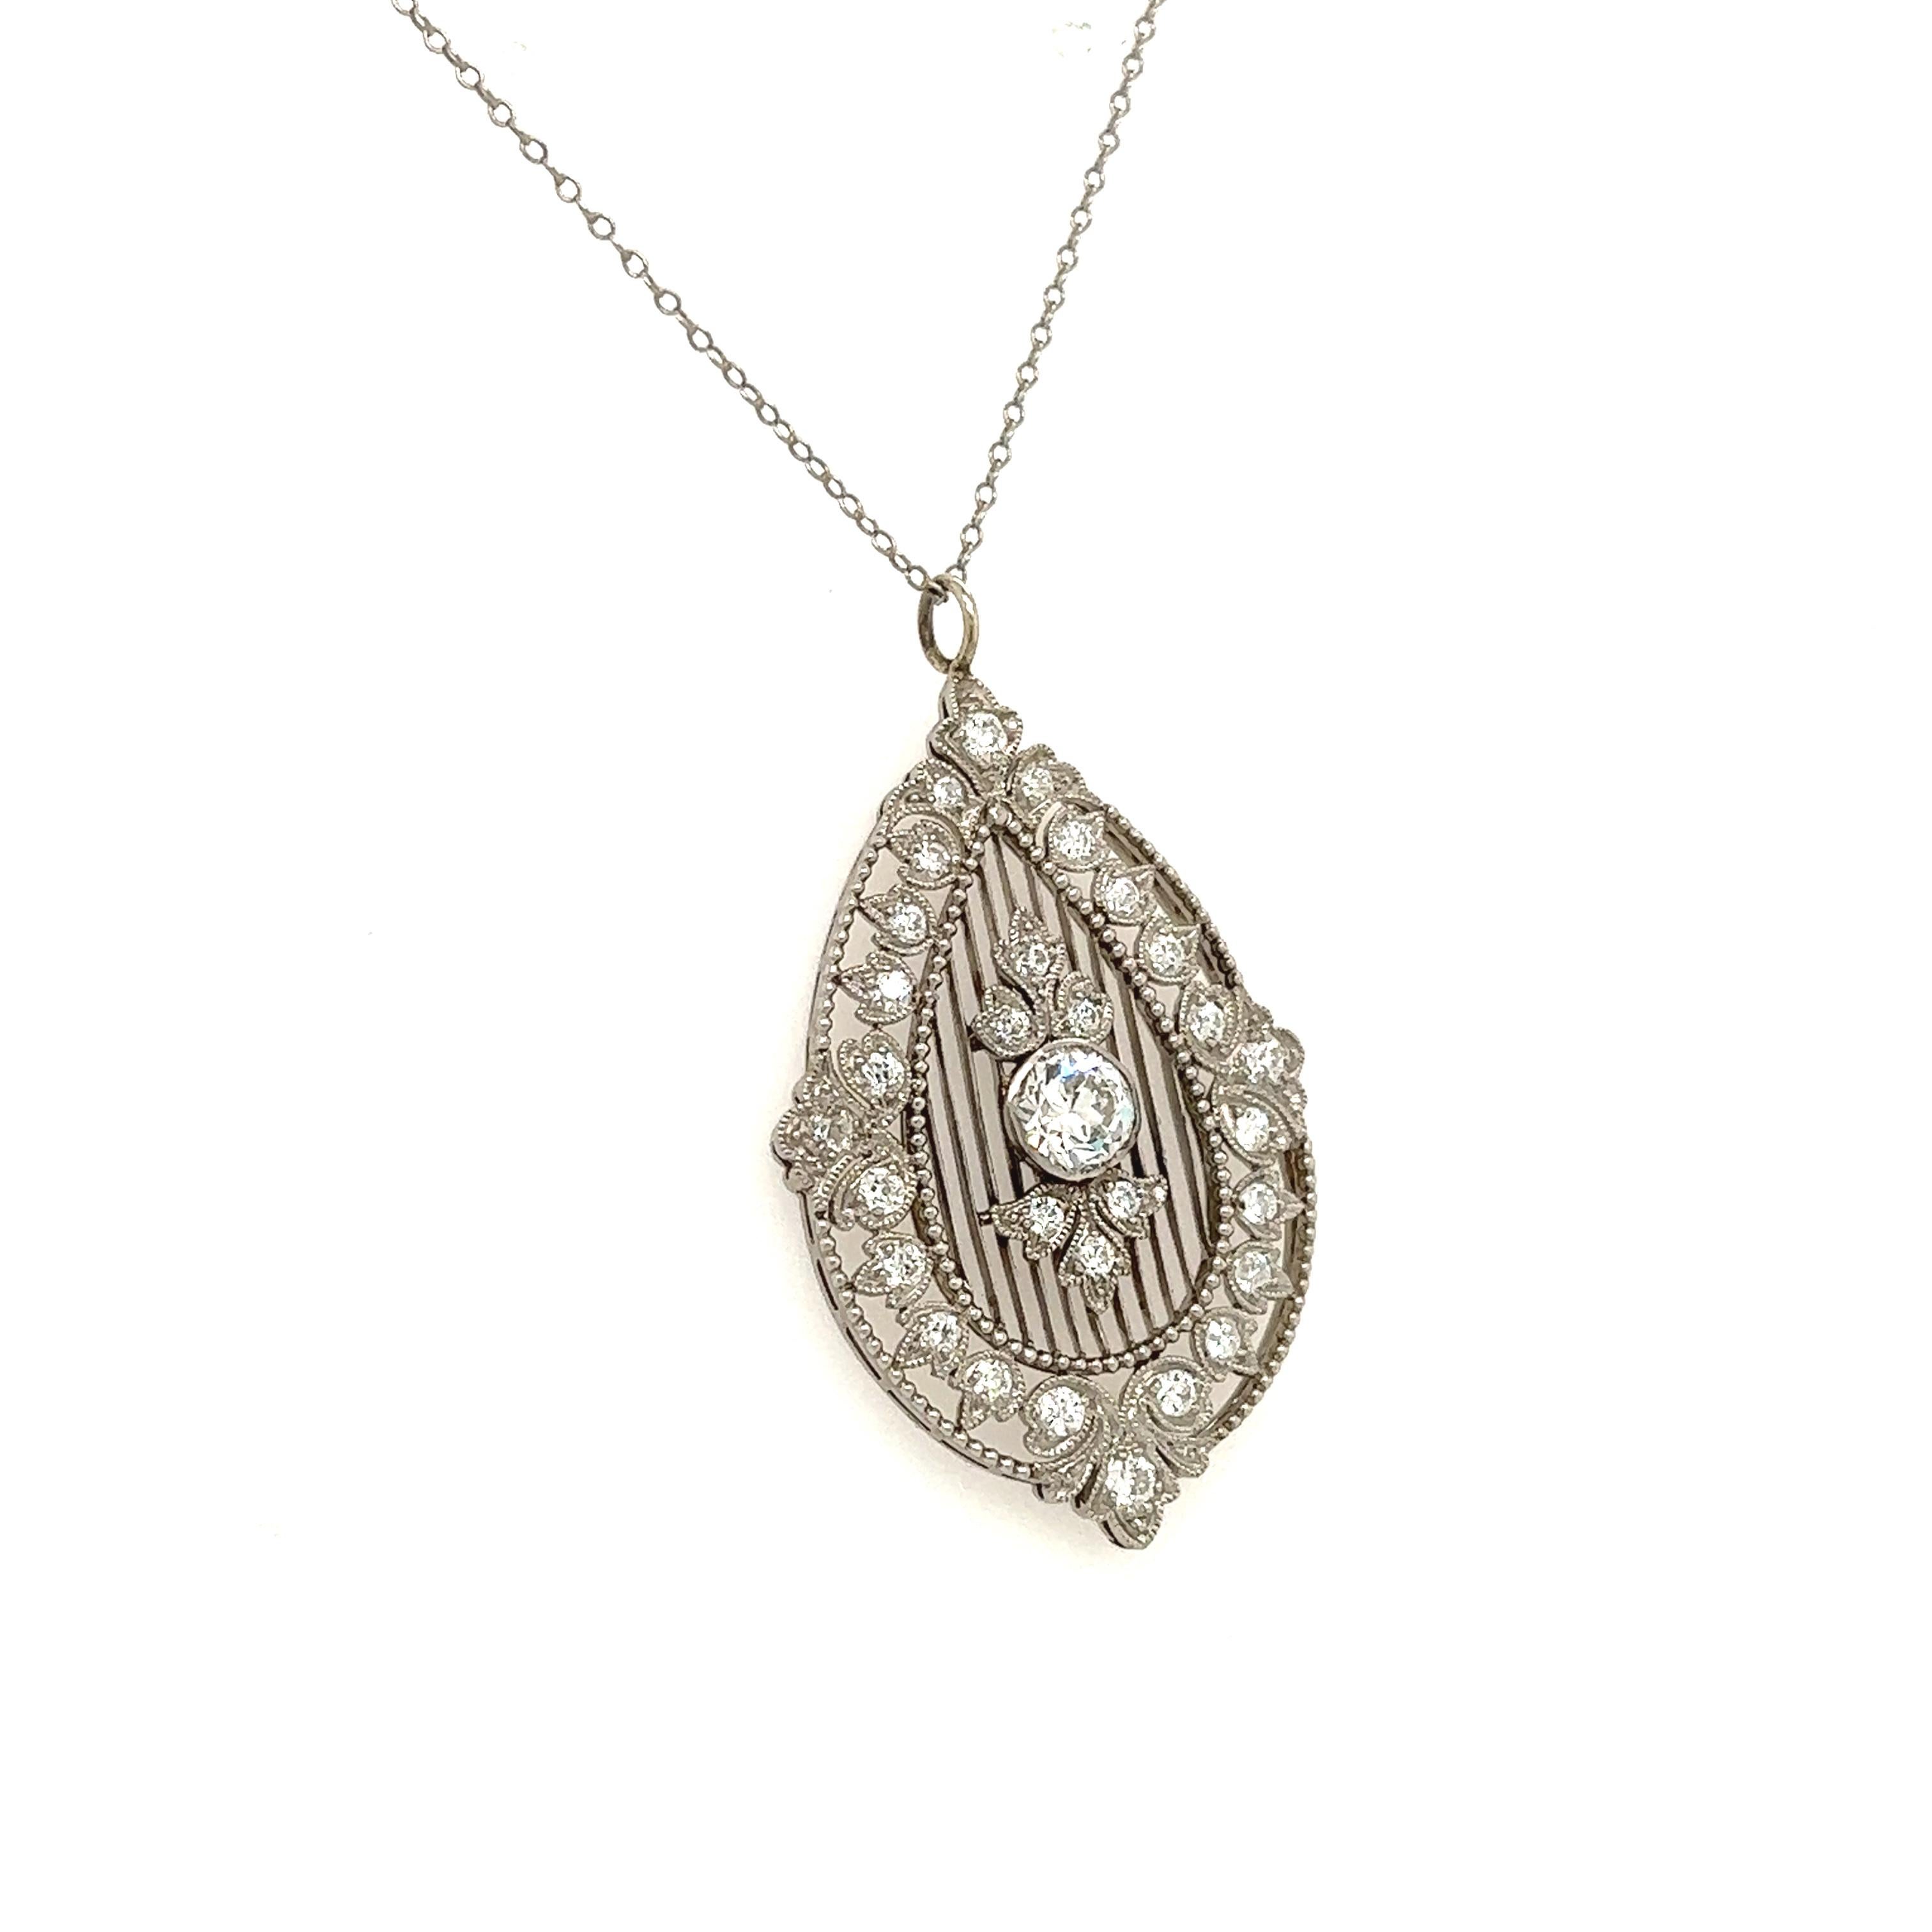 Gorgeous Art Deco creation crafted in platinum. The pendant is delicately crafted with details at every angle.  Filagree and sharp angles are seen throughout the necklace as only a true master of the craft could create. The highlight of the pendant